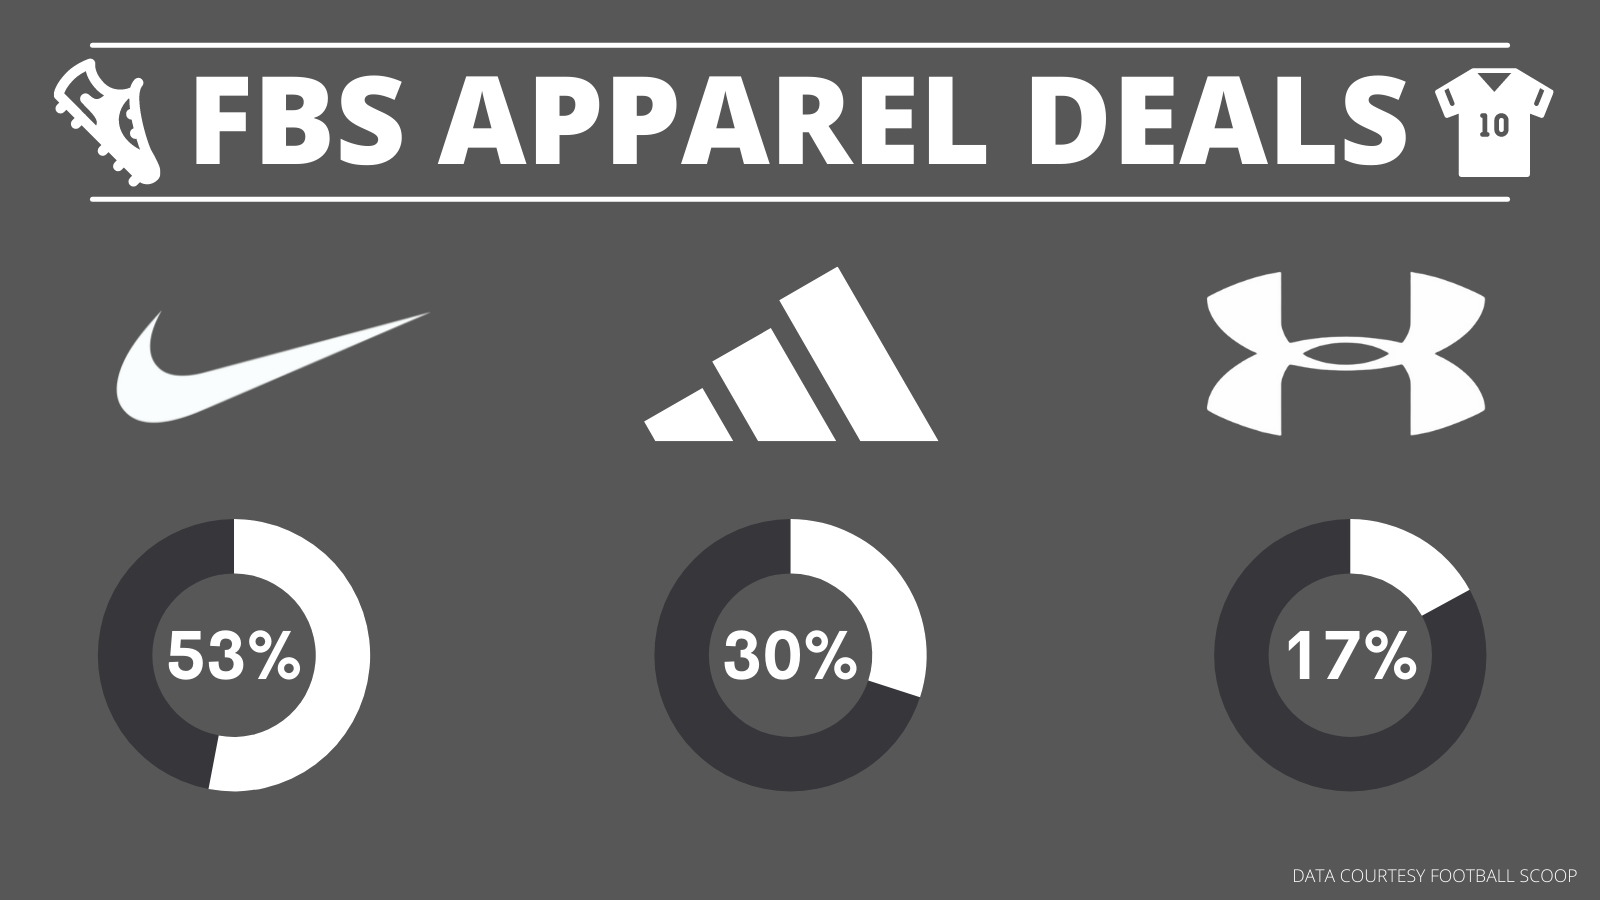 Adidas, Nike apparel deals with University of Louisville and